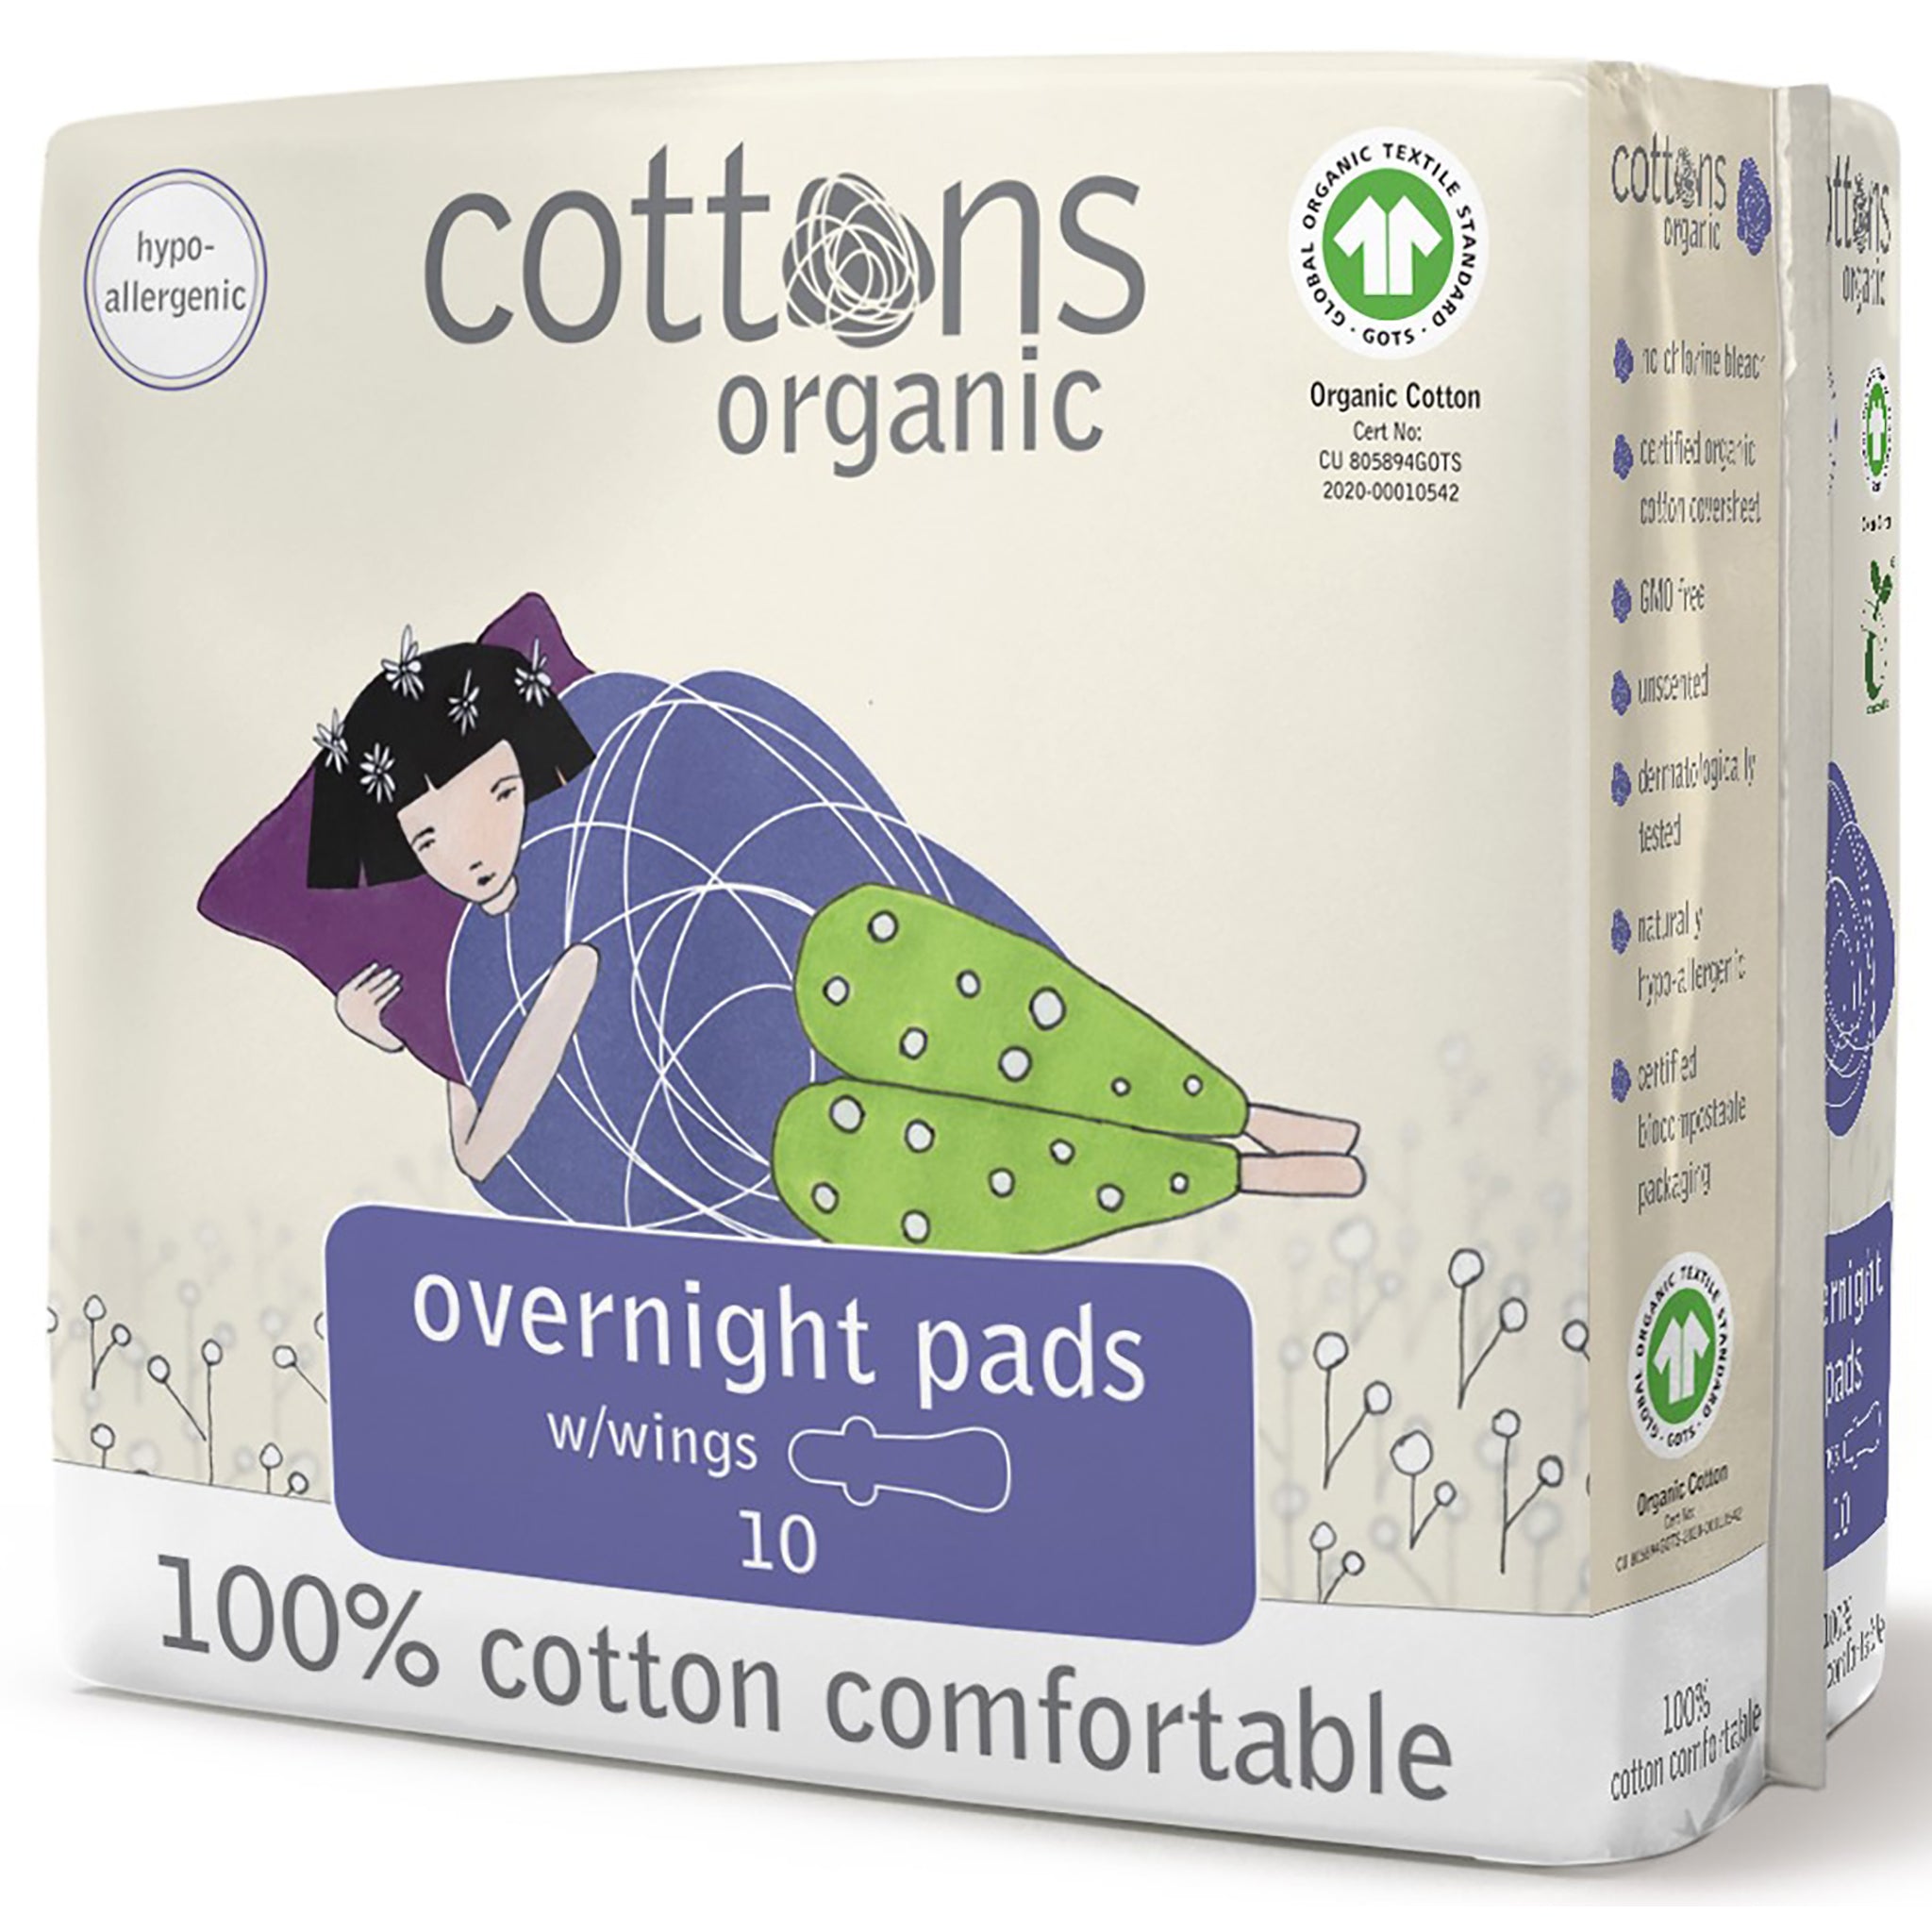 Overnight Pads with Wings - mypure.co.uk